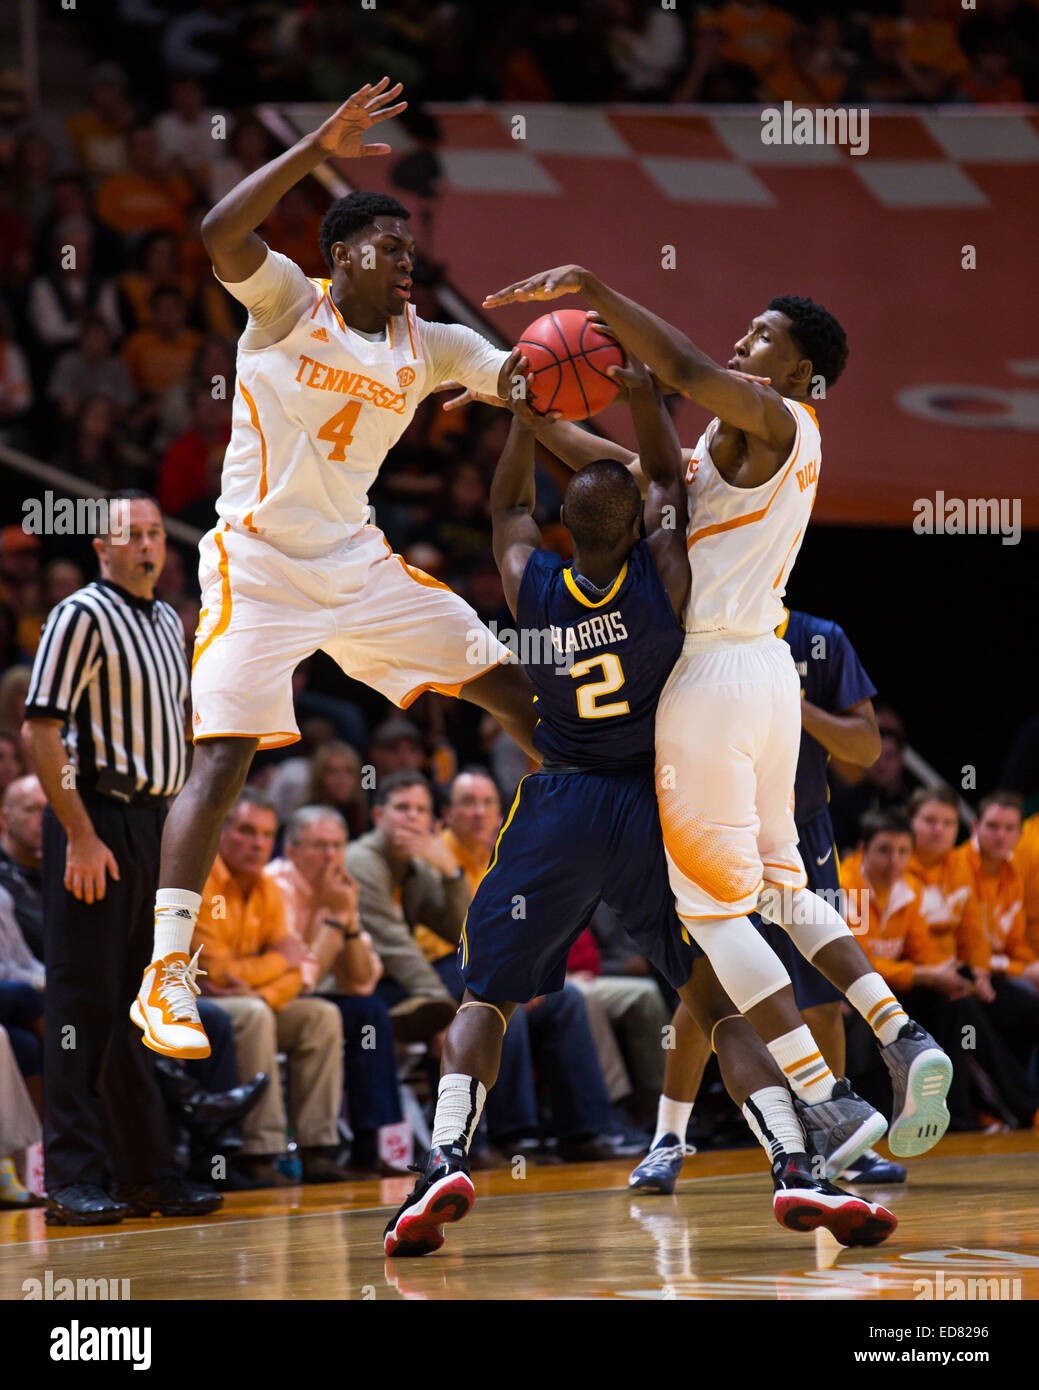 December 31, 2014: Josh Richardson #1 and Armani Moore #4 of the Tennessee Volunteers defend against Devin Harris #2 of the East Tennessee State Buccaneers during the NCAA basketball game between the University of Tennessee Volunteers and the East Tennessee State University Buccaneers at Thompson Boling Arena in Knoxville TN Stock Photo